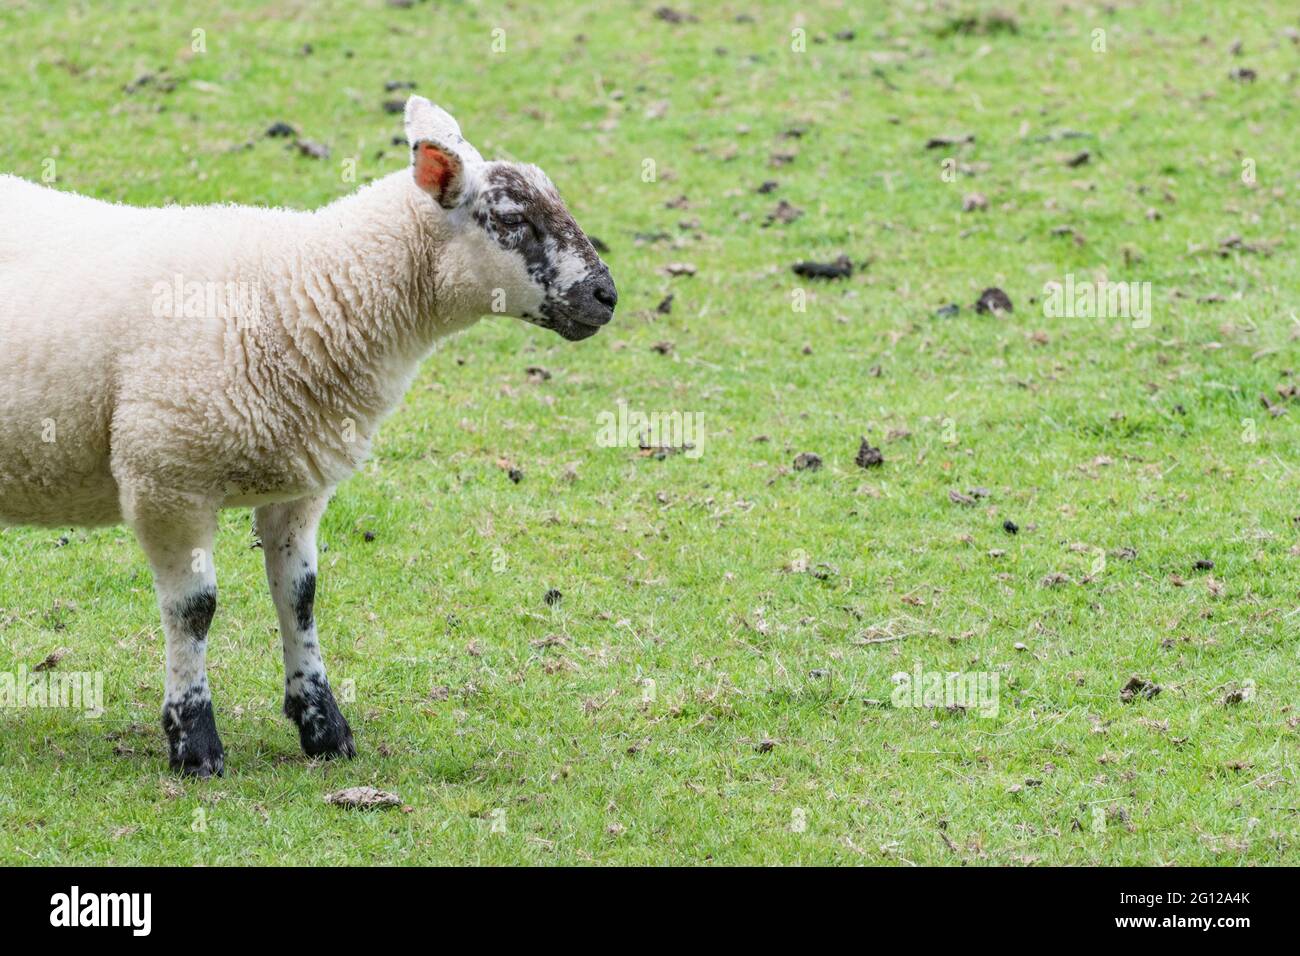 Single solitary sheep in field (under 1 year old) with copy space. For UK agriculture and farming, UK sheep livestock, sheep farming, animal welfare. Stock Photo